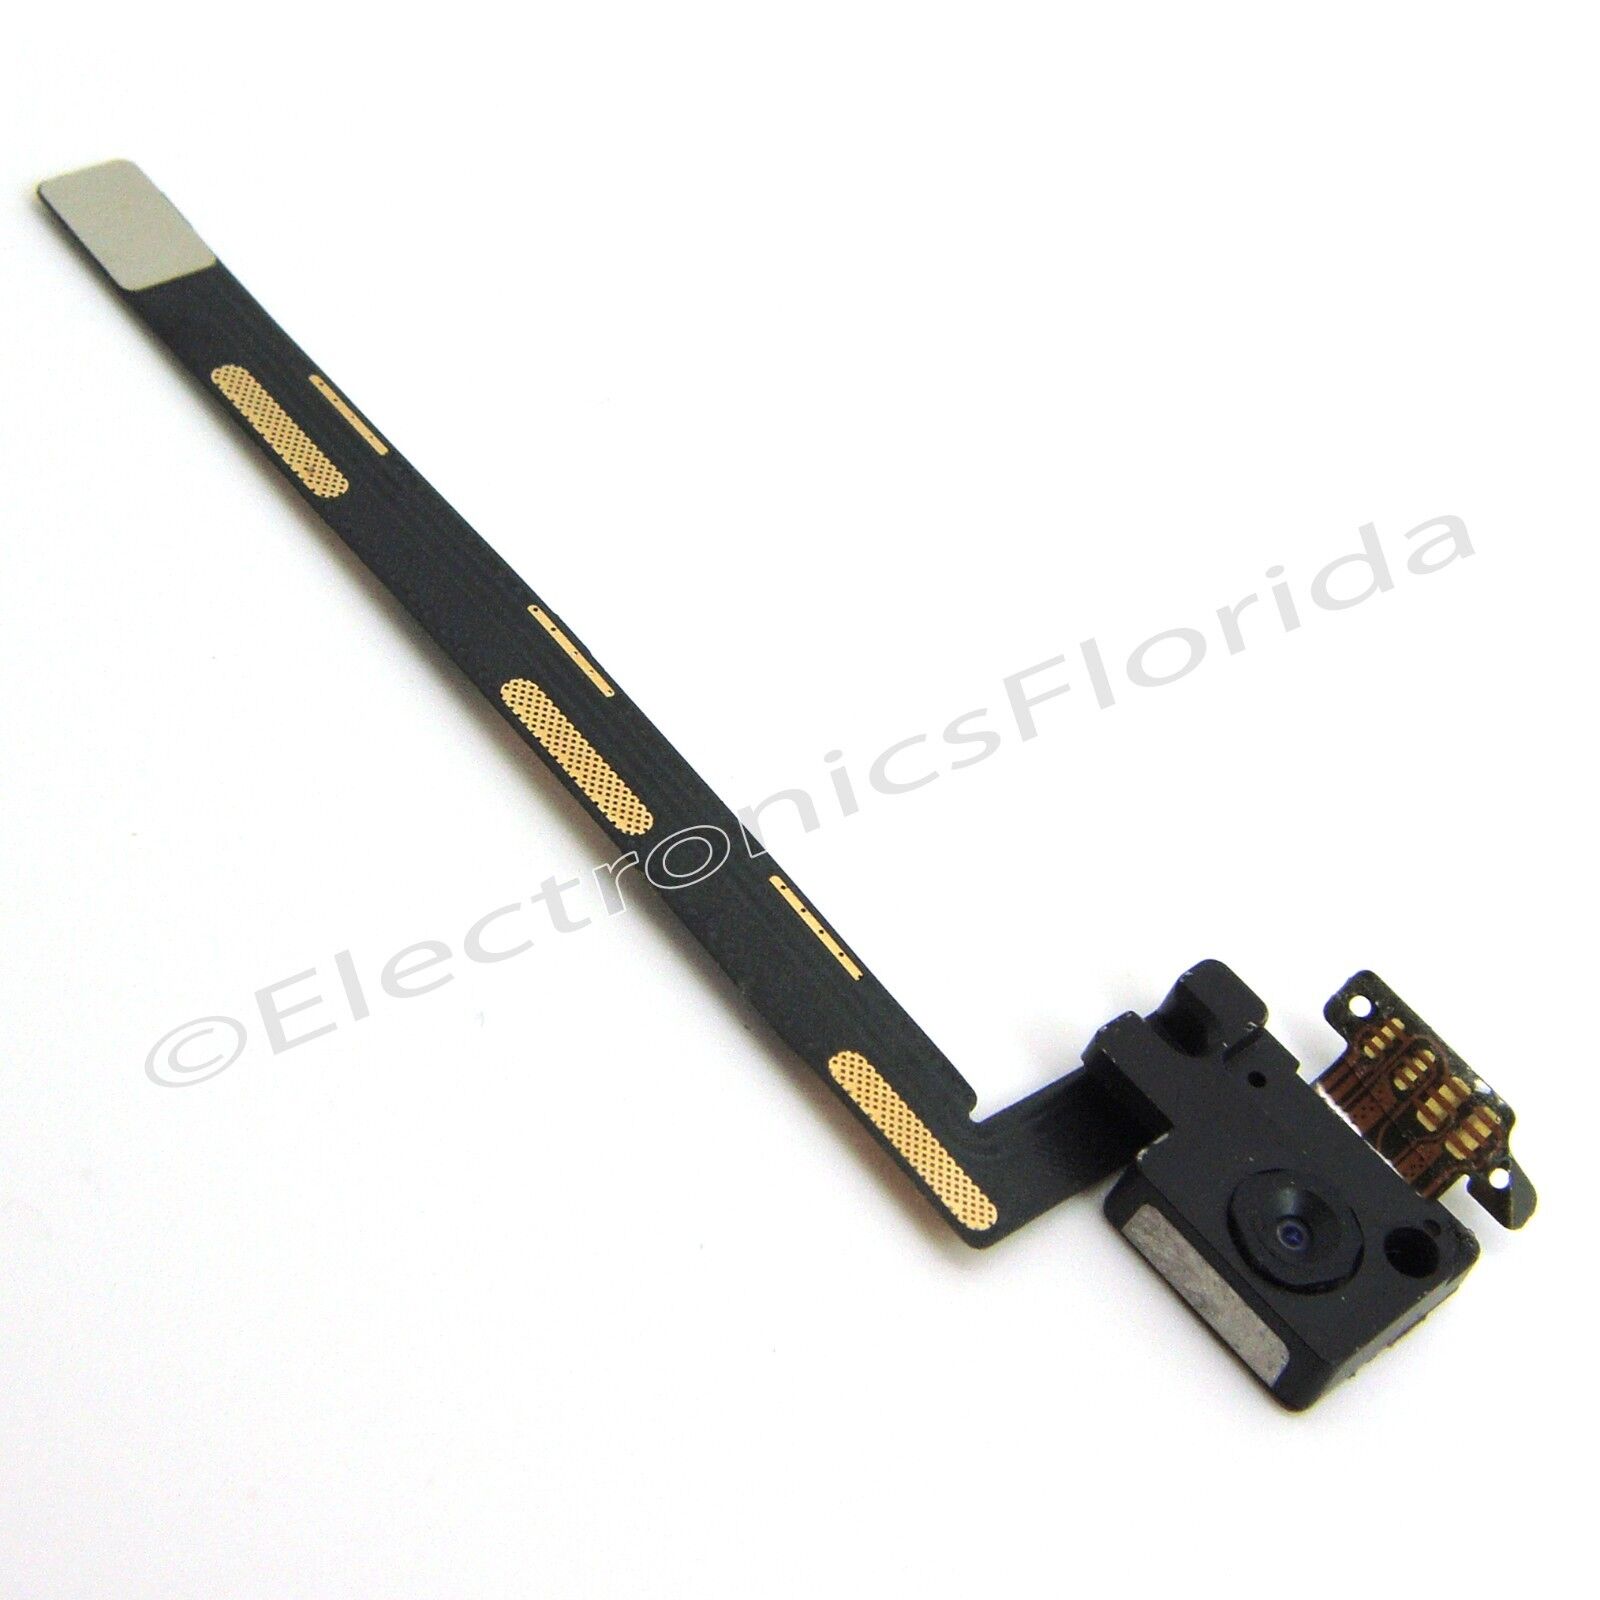 Lot New Front Camera Lens Replacement Repair Parts for Apple iPad 2 2nd Gen b222